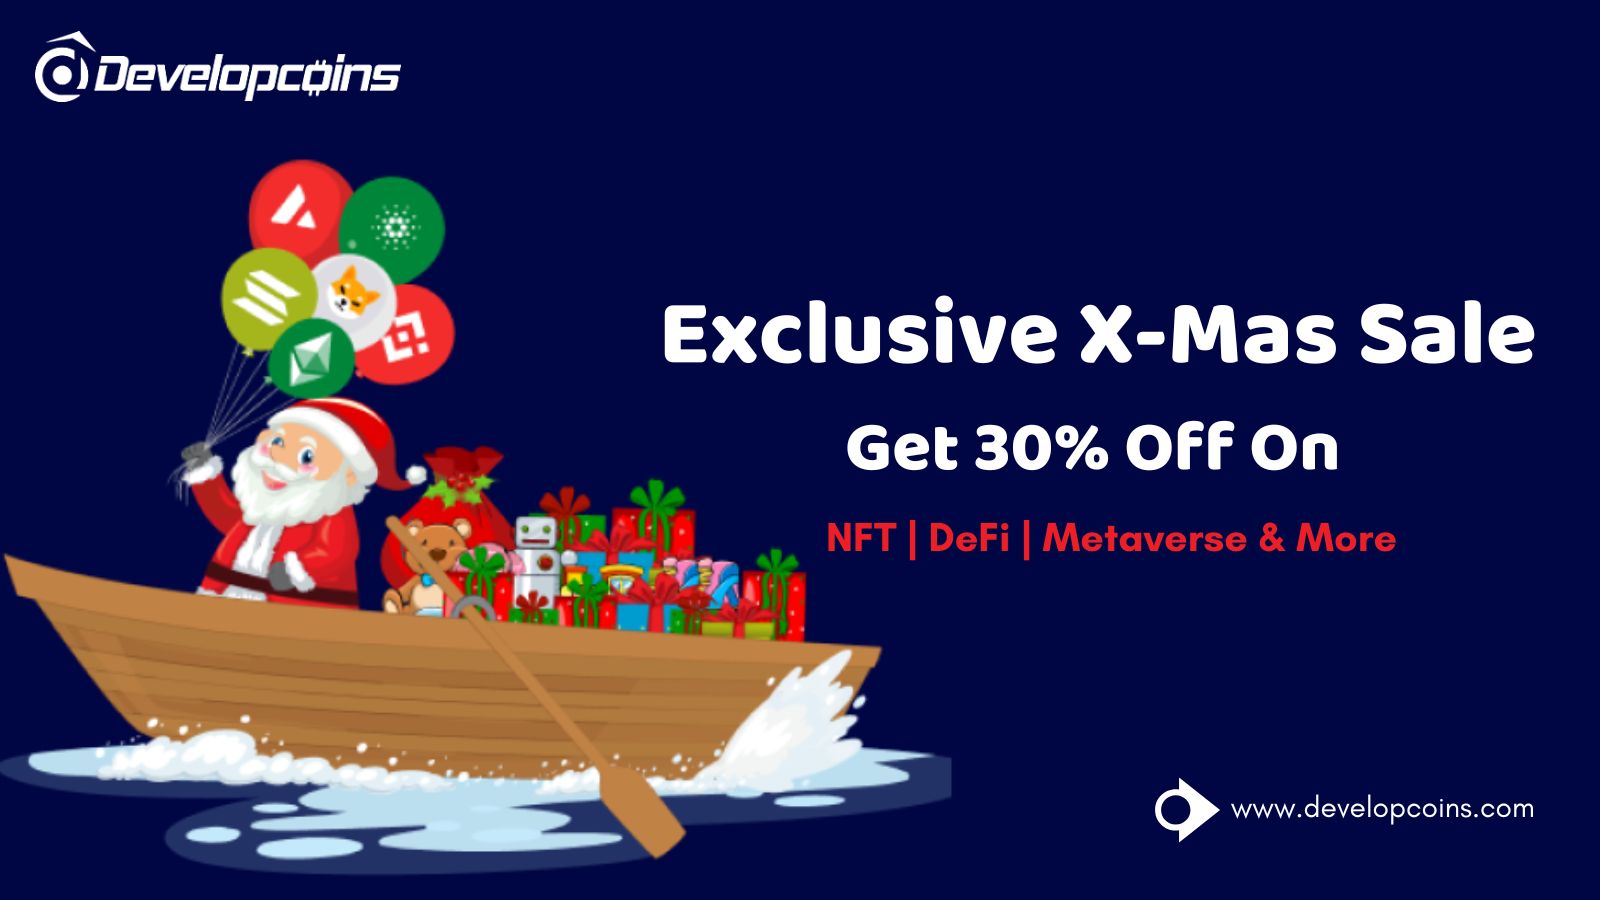 Grab Exclusive Christmas And New Year Super Sale Offers from Developcoins!